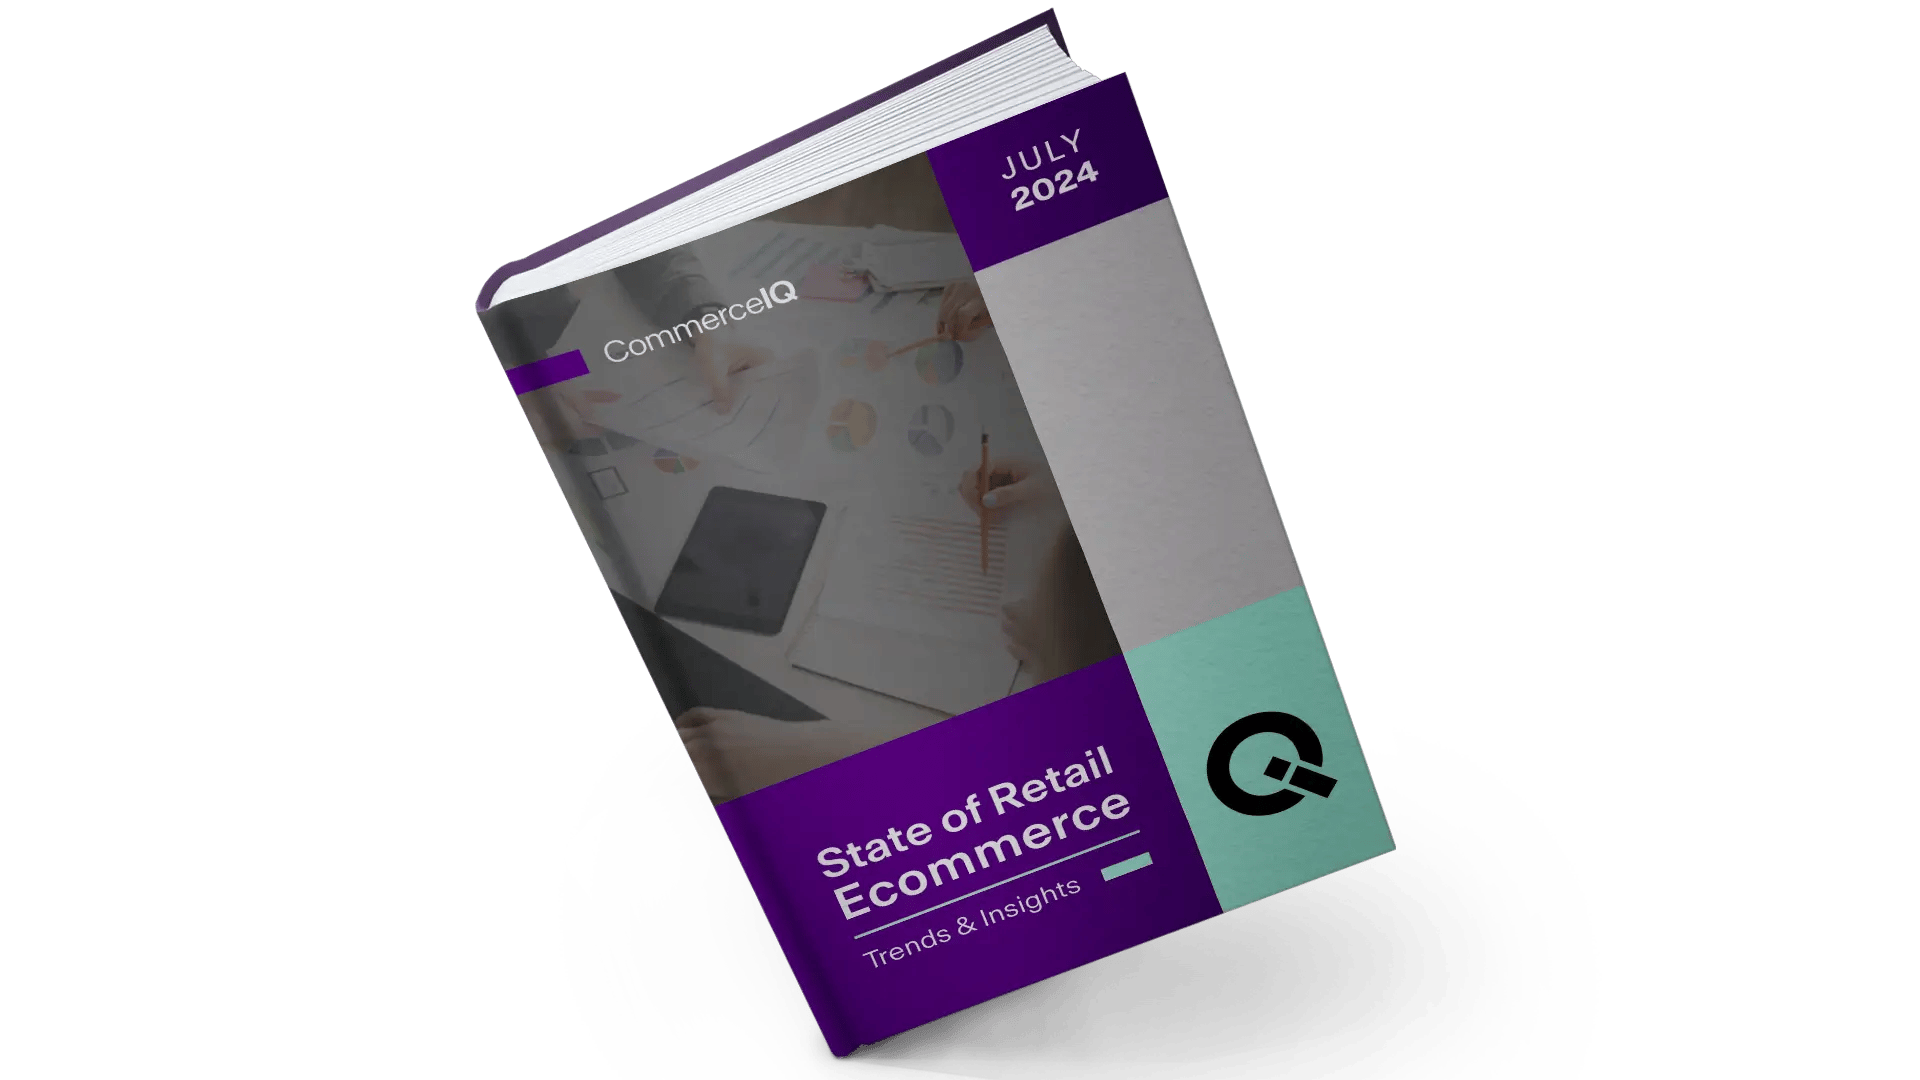 State of retail Ecommerce_Report Book copy (1)